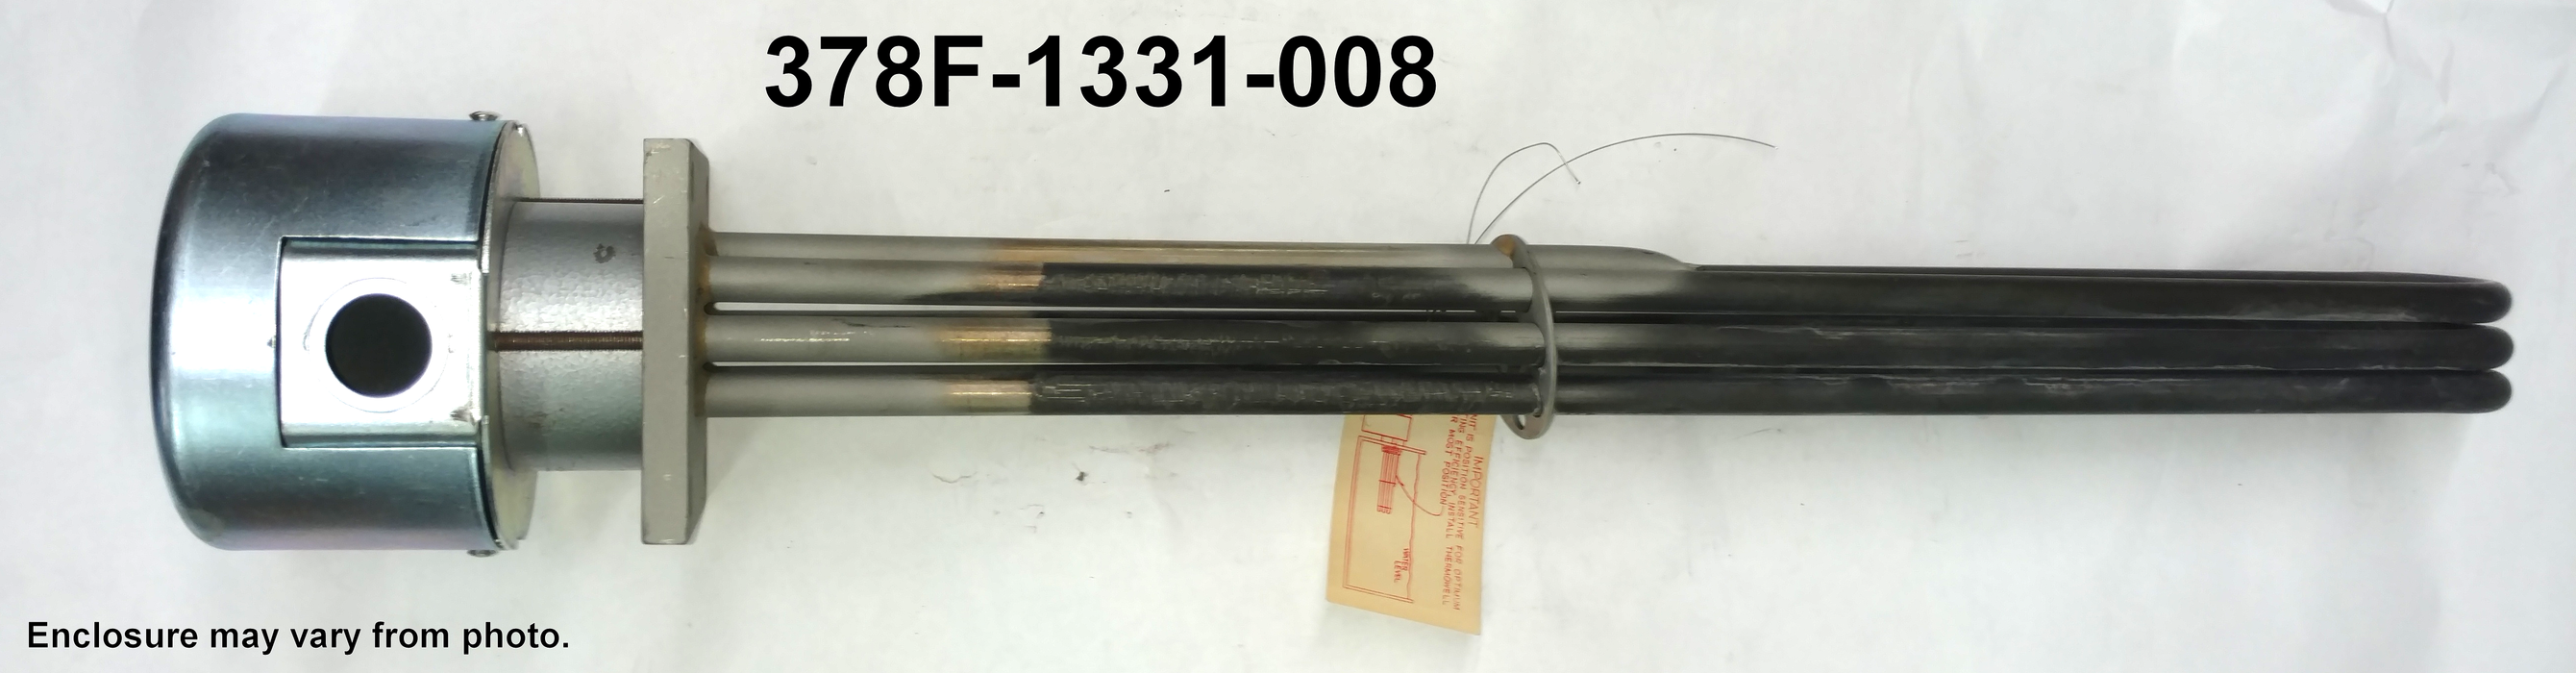 FA-5041 Hobart 5000W 240V 1-Phase, 13-5/8" Immersion Length Commercial Dishwasher Equivalent Replacement Element